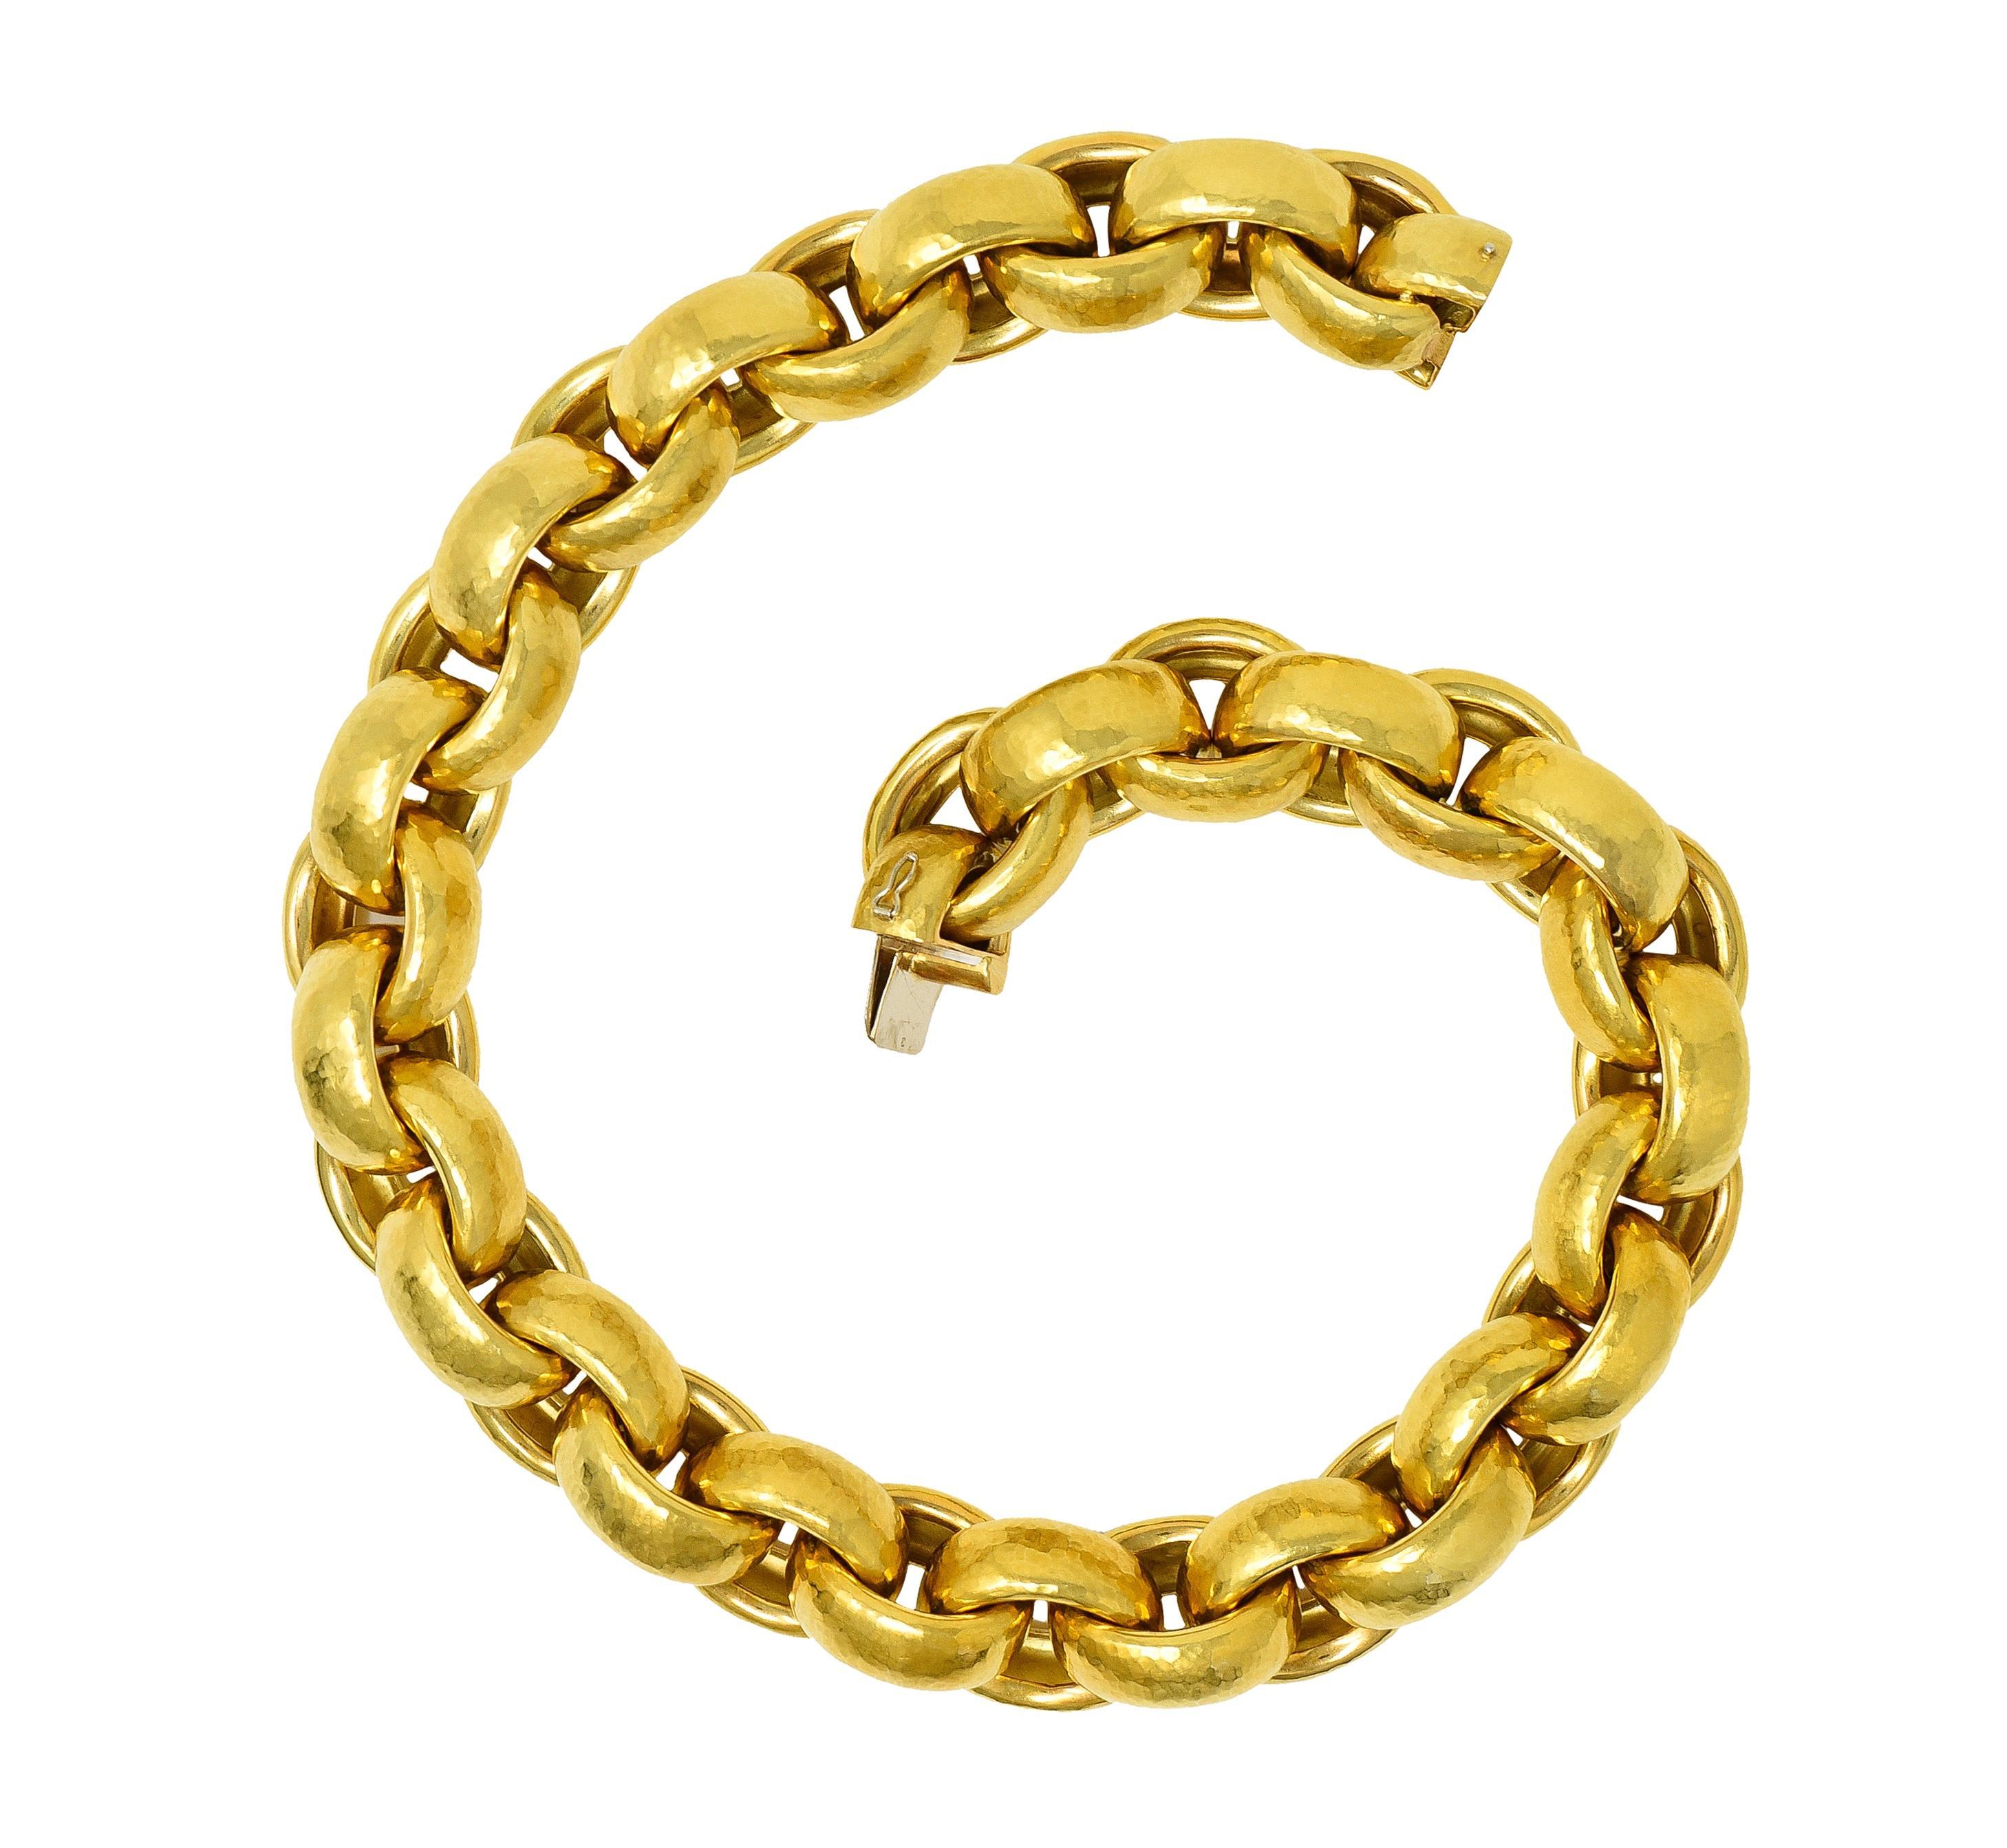 Designed as a puffed curb link chain 
With hammered texture throughout
Completed by a concealed clasp with figure eight safety
With Italian assay marks for 18 karat gold
Fully signed Paloma Picasso and Tiffany & Co.
Circa: 1989; via dated